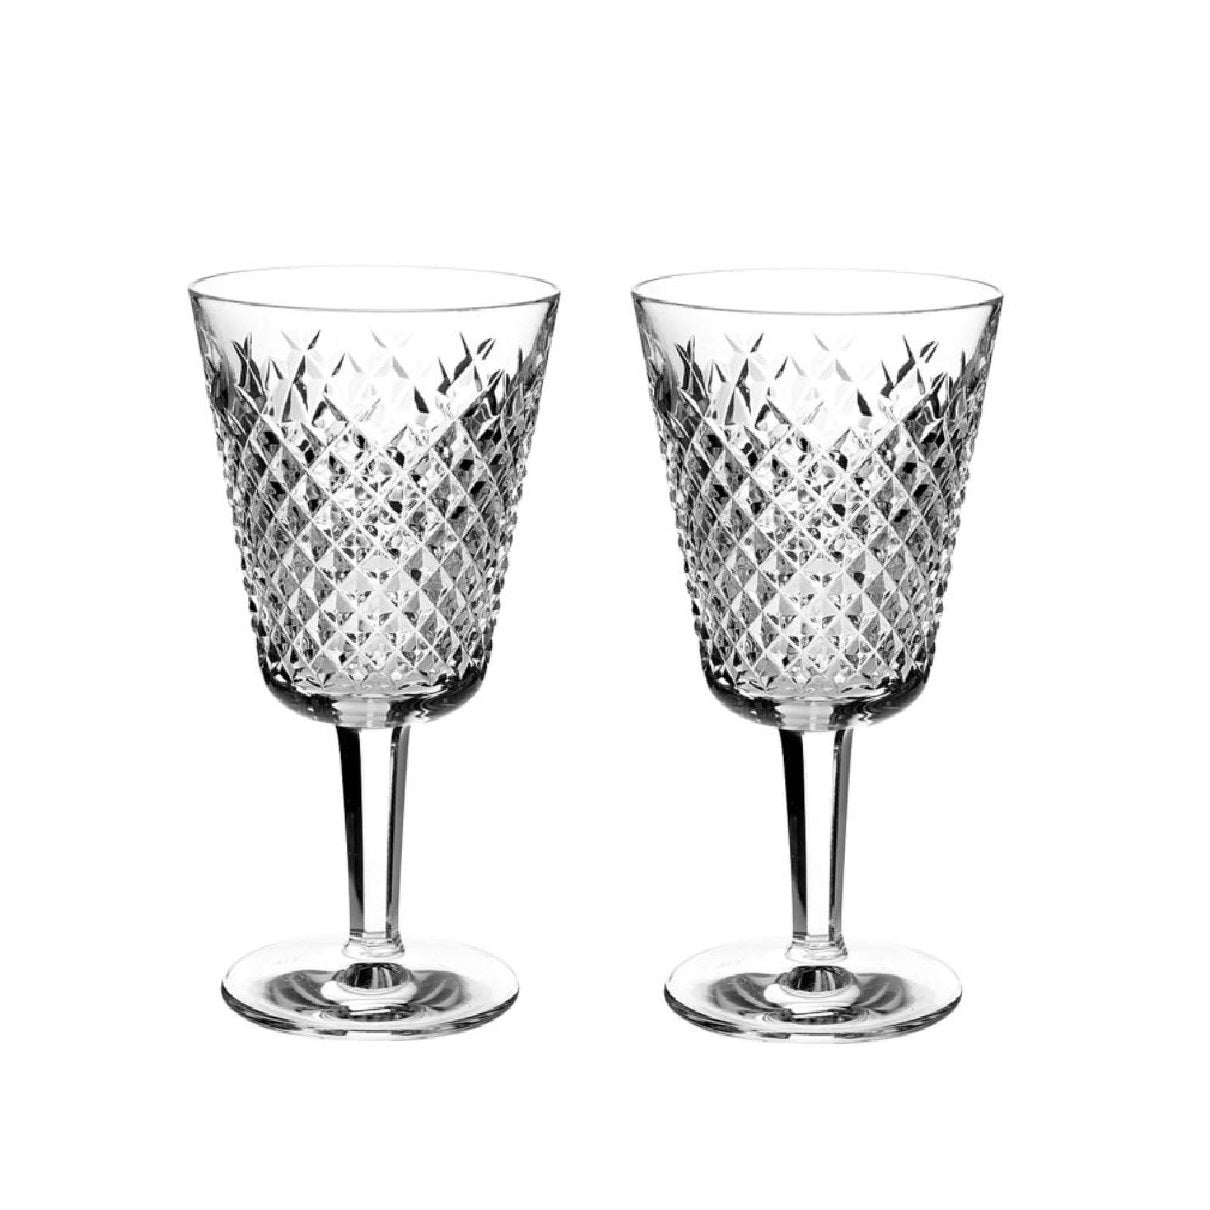 Waterford Crystal Alana Goblet Pair  Waterford Alana pattern is a stunning combination of brilliance and clarity. Elegant and versatile, the Alana Goblet can be used for serving wine, water or juices.